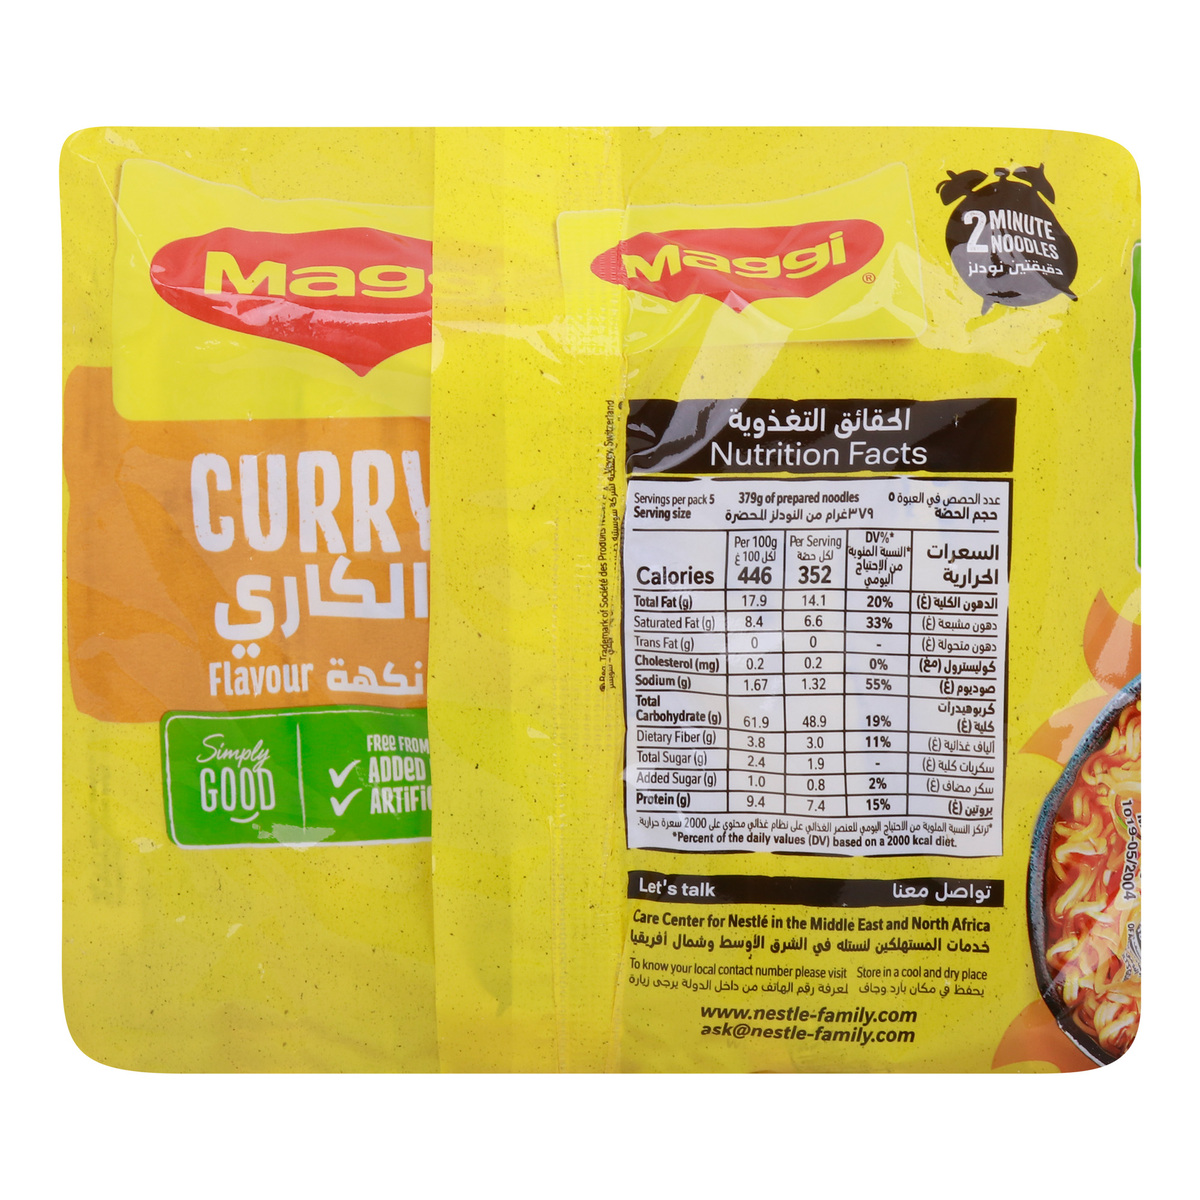 Maggi 2 Minutes Curry Noodles 5 x 79 g